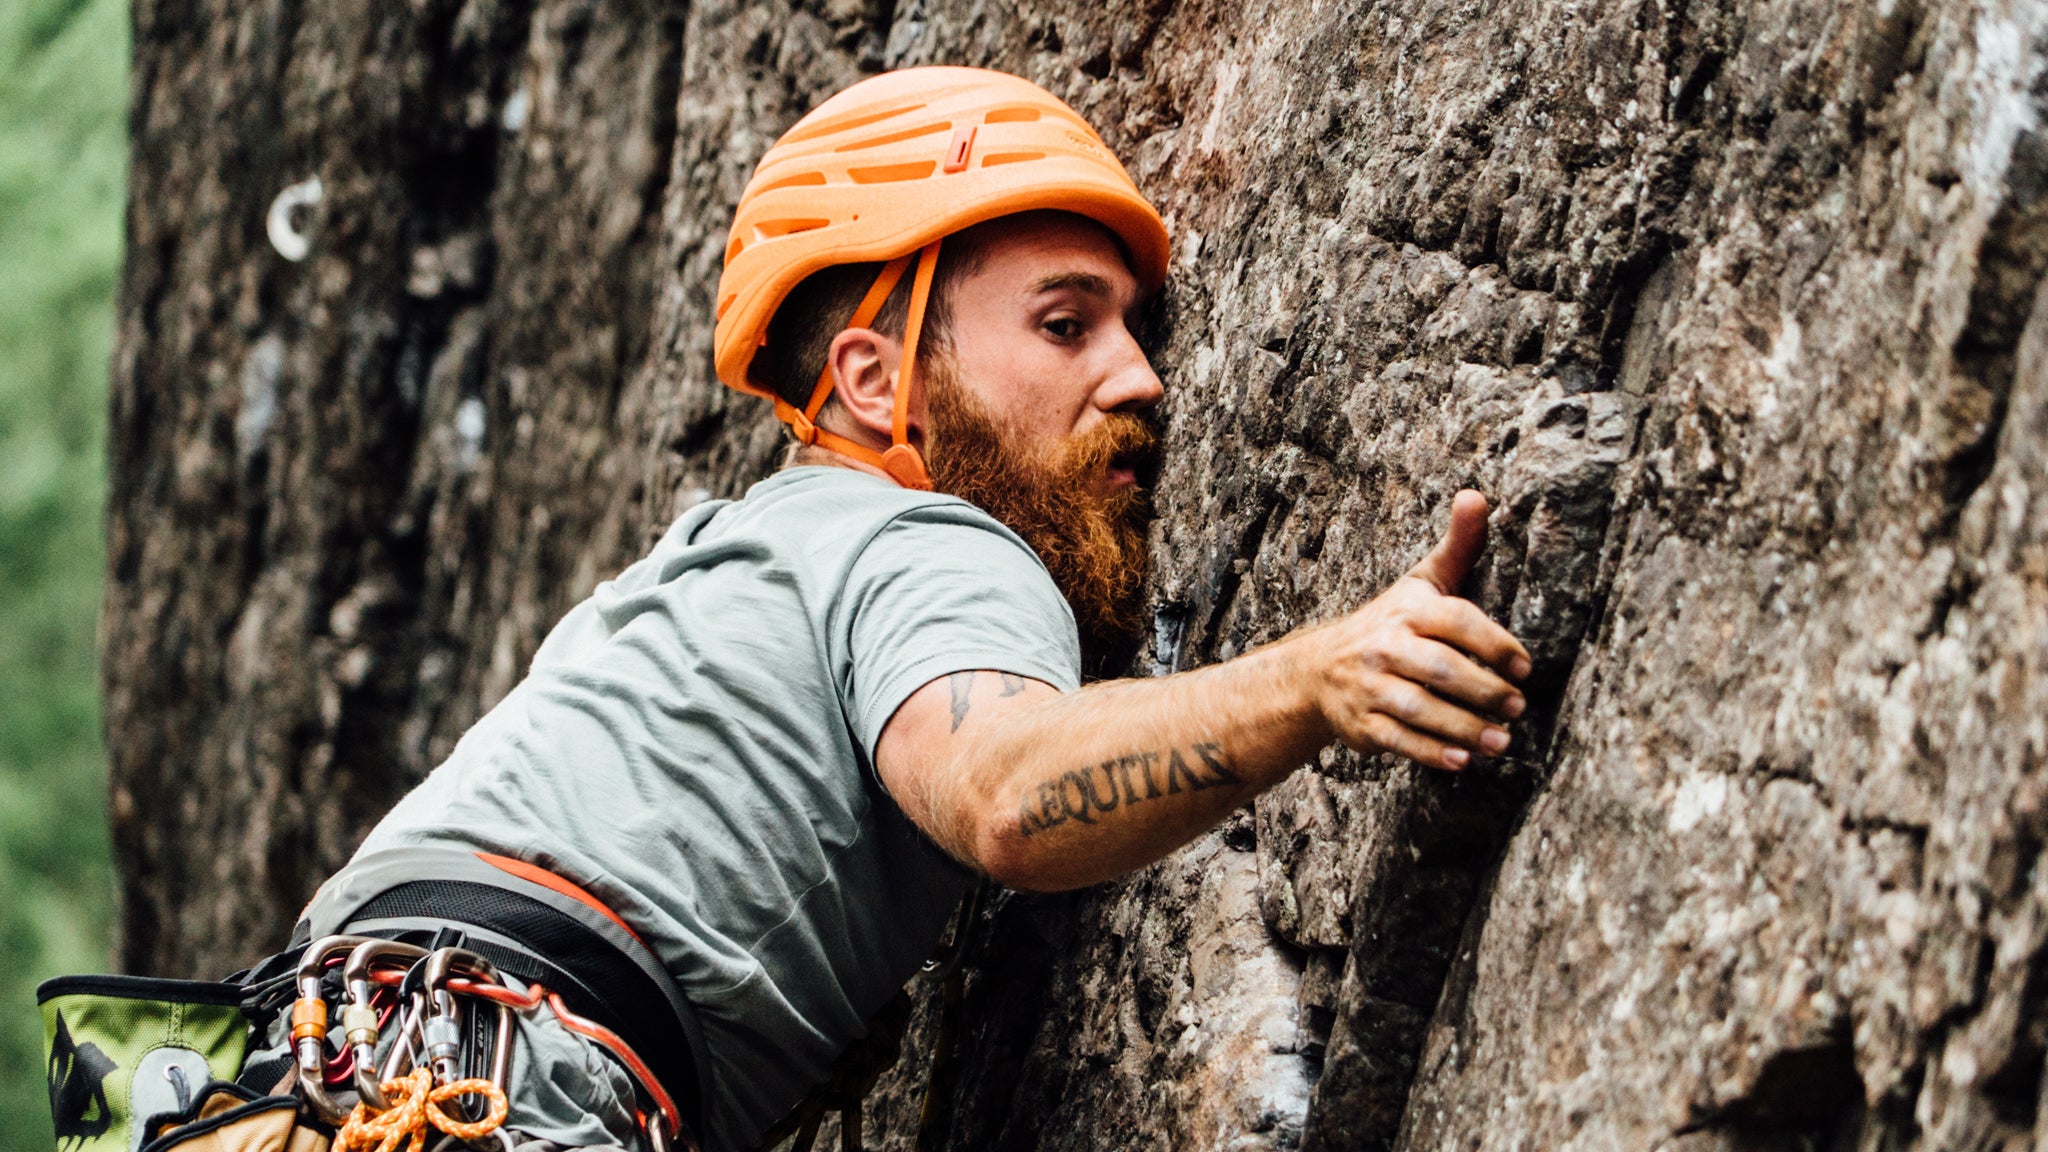 Organic And Comfy: Is This The Future Of Climbing Clothing